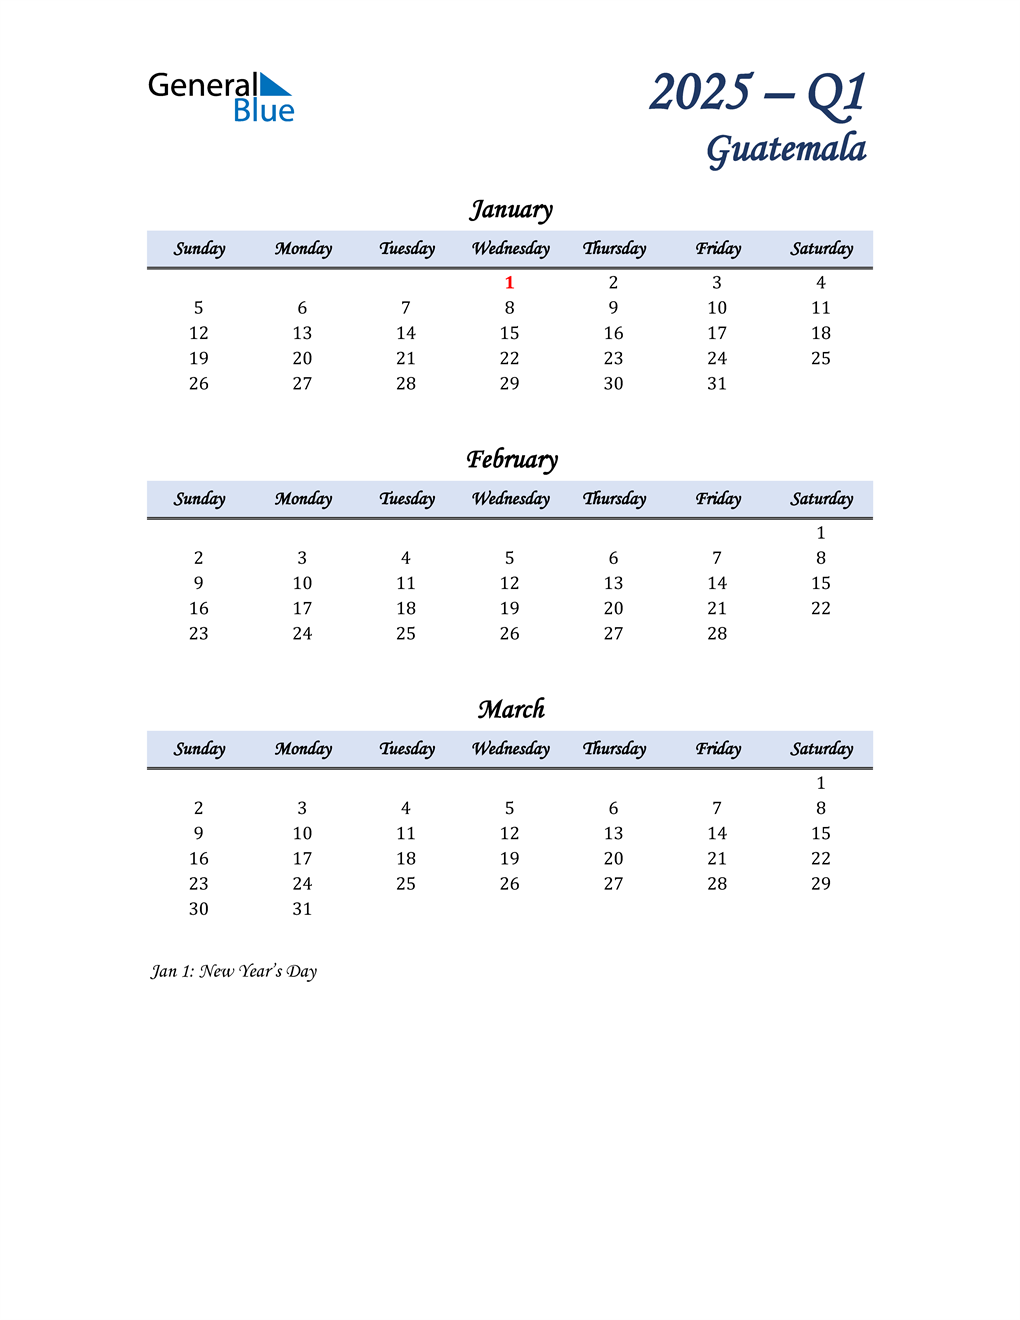  January, February, and March Calendar for Guatemala